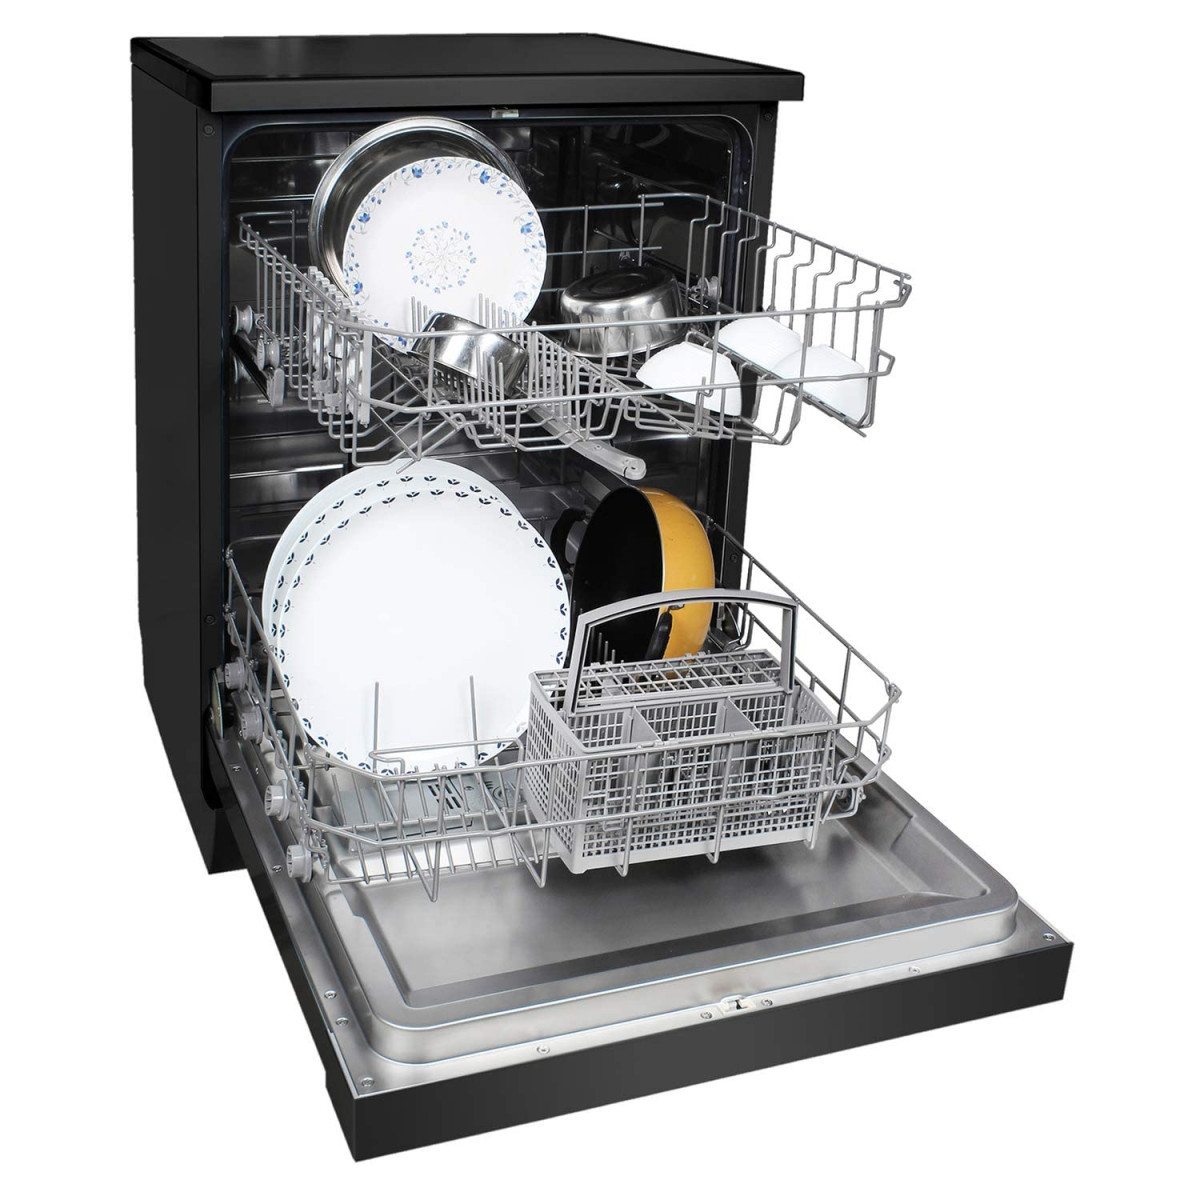 Faber 12 Place Settings Dishwasher FFSD 6PR 12S Neo Black Best suited for Indian Kitchen Hygiene Wash